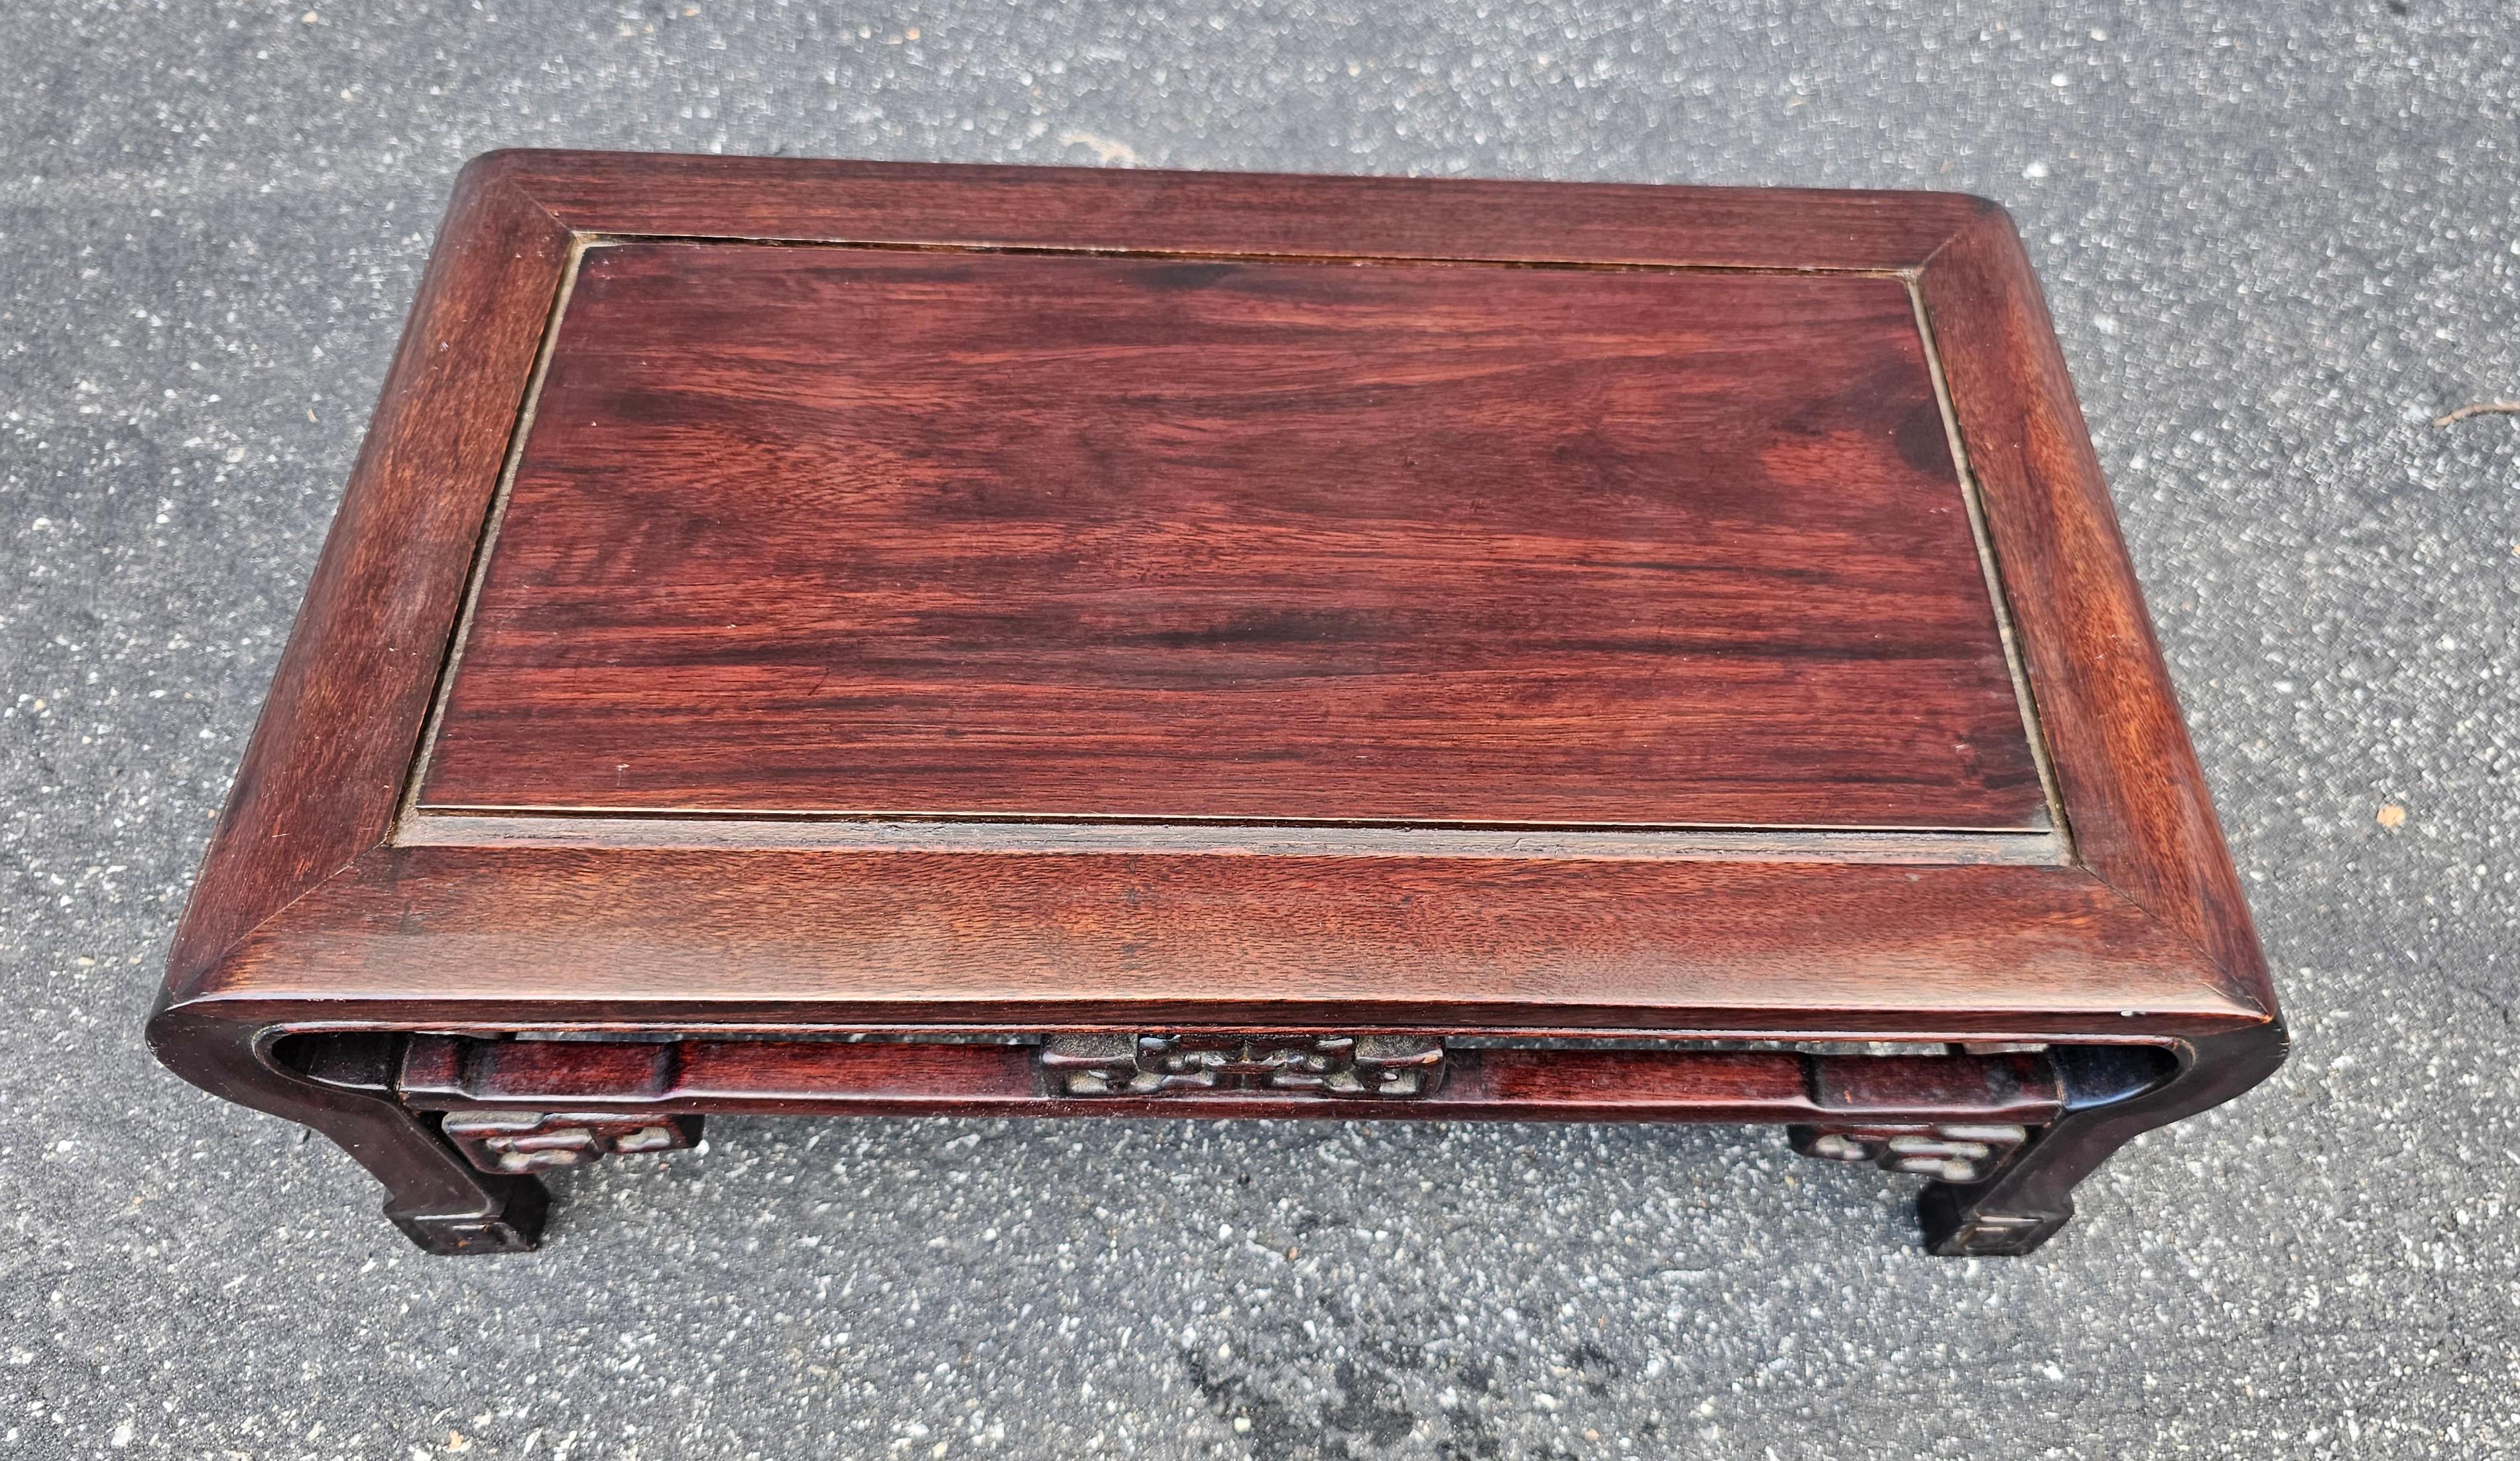 Chinese Chippendale Rosewood Foot Stool or Bonsai Tree Plant Stand  In Good Condition For Sale In Germantown, MD